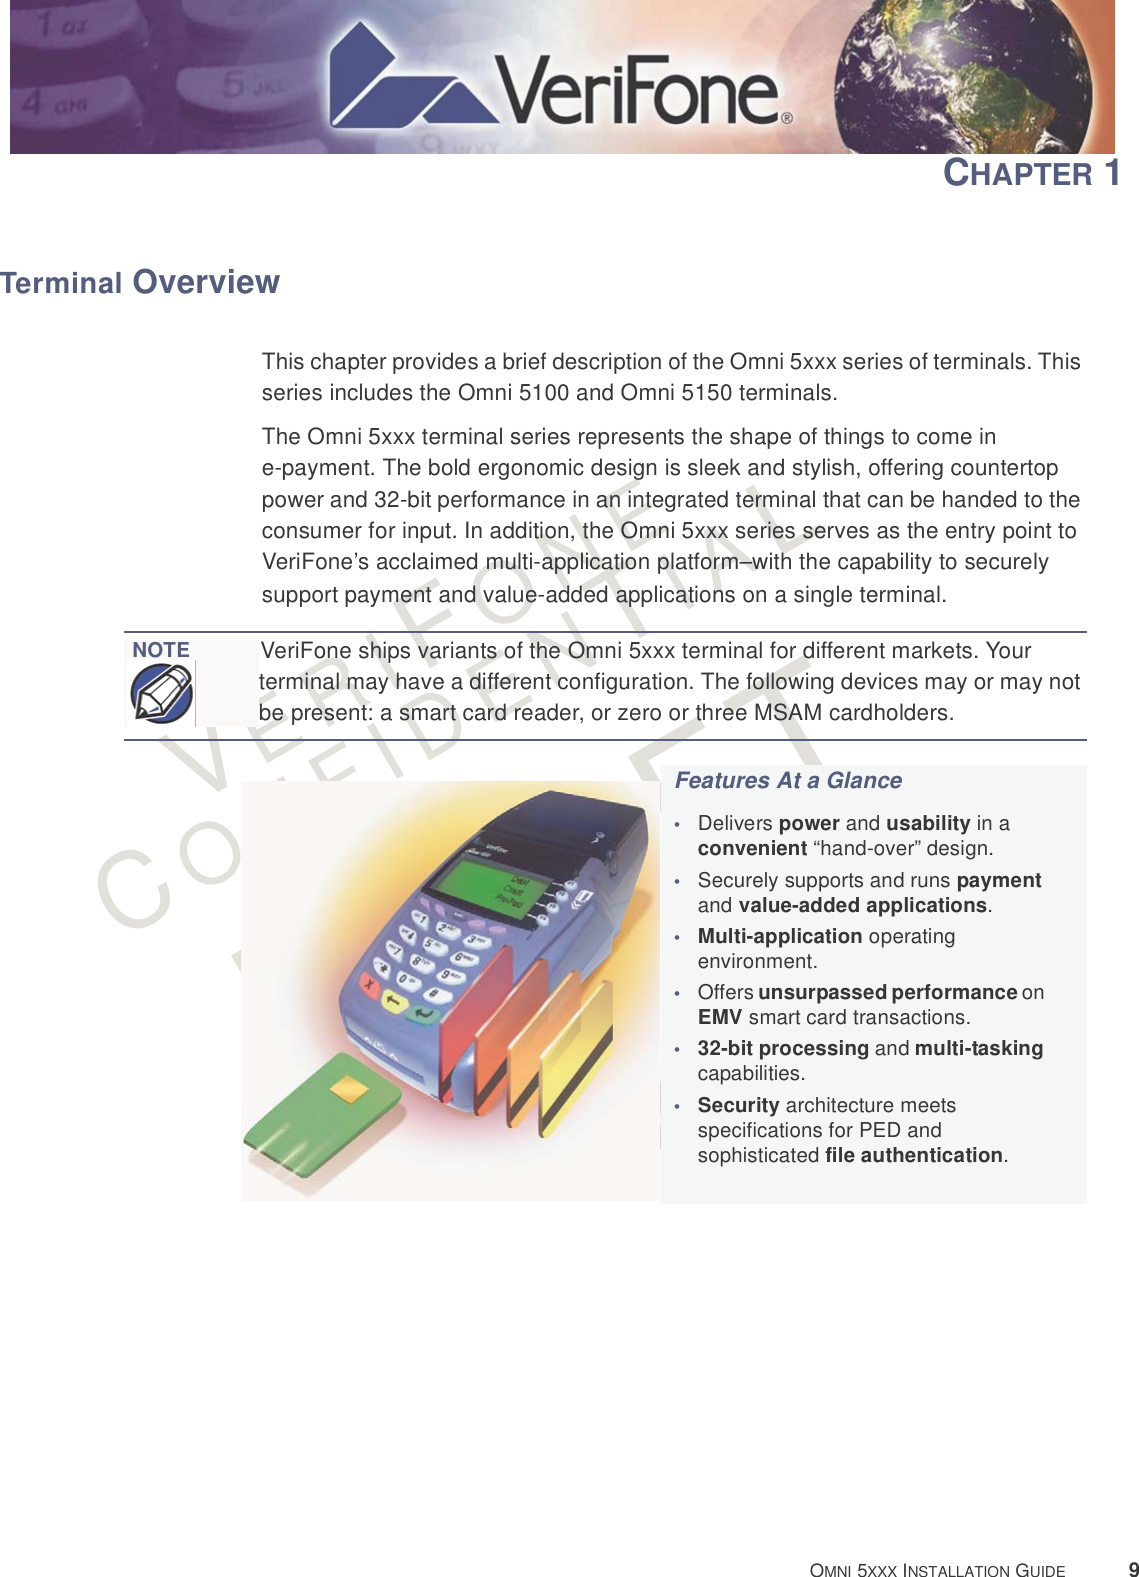 VERIFONECONFIDENTIALRAFT OMNI 5XXX INSTALLATION GUIDE 9CHAPTER 1Terminal OverviewThis chapter provides a brief description of the Omni 5xxx series of terminals. This series includes the Omni 5100 and Omni 5150 terminals. The Omni 5xxx terminal series represents the shape of things to come in e-payment. The bold ergonomic design is sleek and stylish, offering countertop power and 32-bit performance in an integrated terminal that can be handed to the consumer for input. In addition, the Omni 5xxx series serves as the entry point to VeriFone’s acclaimed multi-application platform–with the capability to securely support payment and value-added applications on a single terminal. NOTEVeriFone ships variants of the Omni 5xxx terminal for different markets. Your terminal may have a different configuration. The following devices may or may not be present: a smart card reader, or zero or three MSAM cardholders.Features At a Glance•Delivers power and usability in a convenient “hand-over” design.•Securely supports and runs payment and value-added applications.•Multi-application operating environment.•Offers unsurpassed performance on EMV smart card transactions. •32-bit processing and multi-tasking capabilities.•Security architecture meets specifications for PED and sophisticated file authentication.